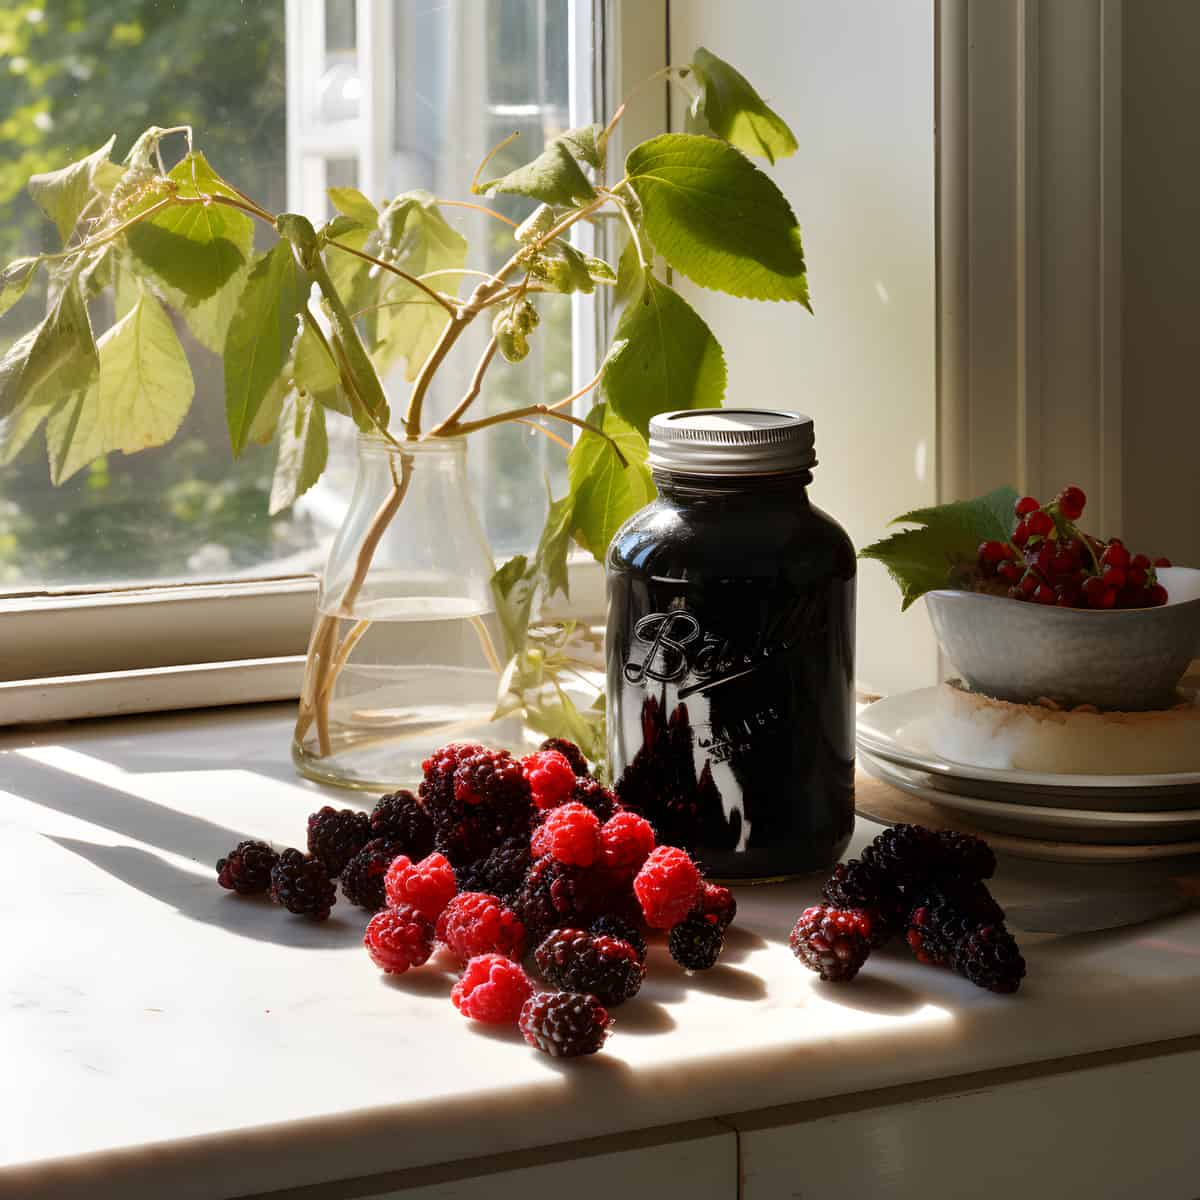 Youngberry on a kitchen counter